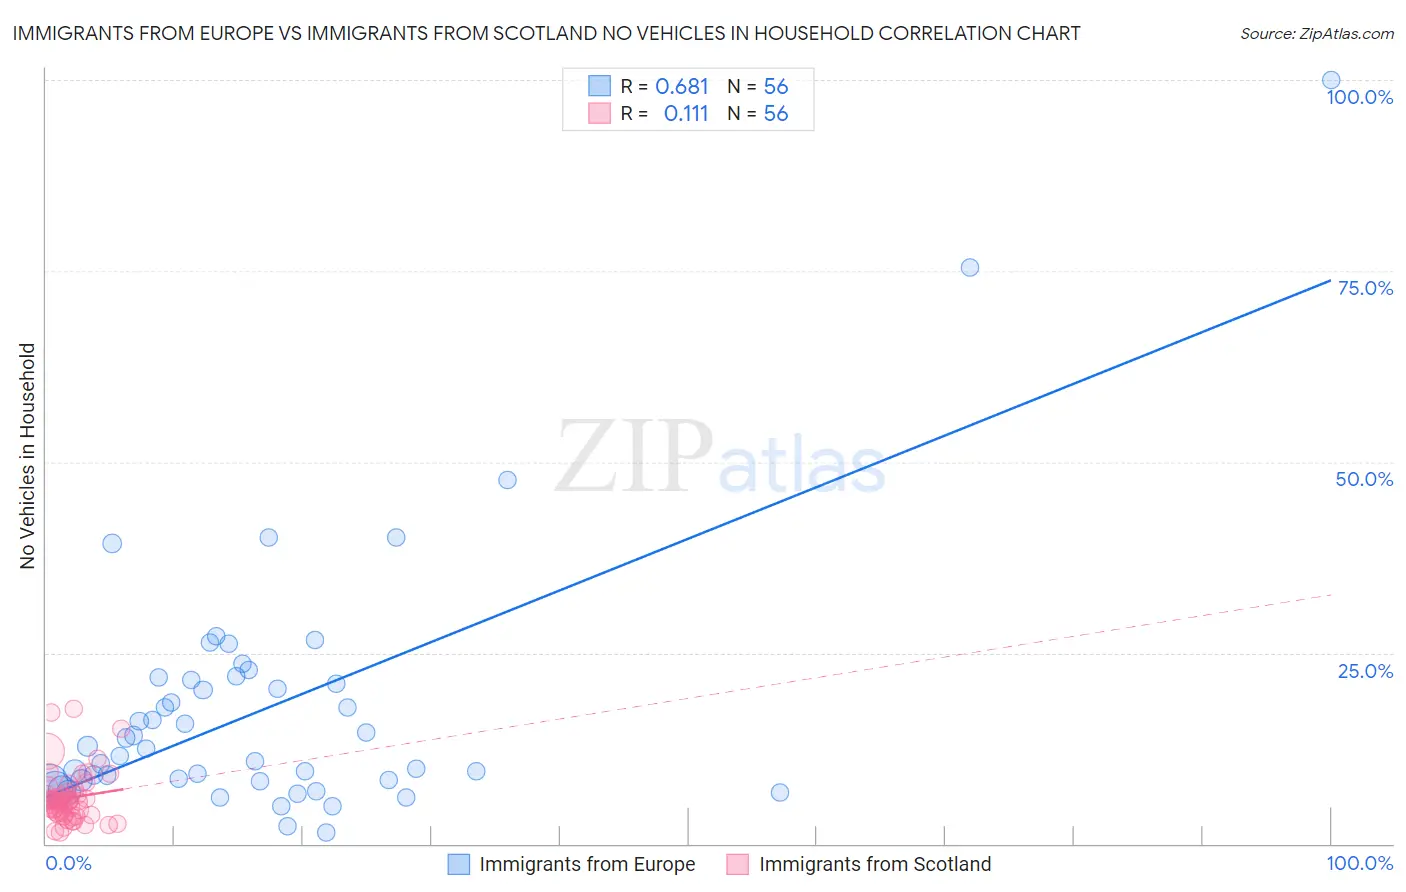 Immigrants from Europe vs Immigrants from Scotland No Vehicles in Household